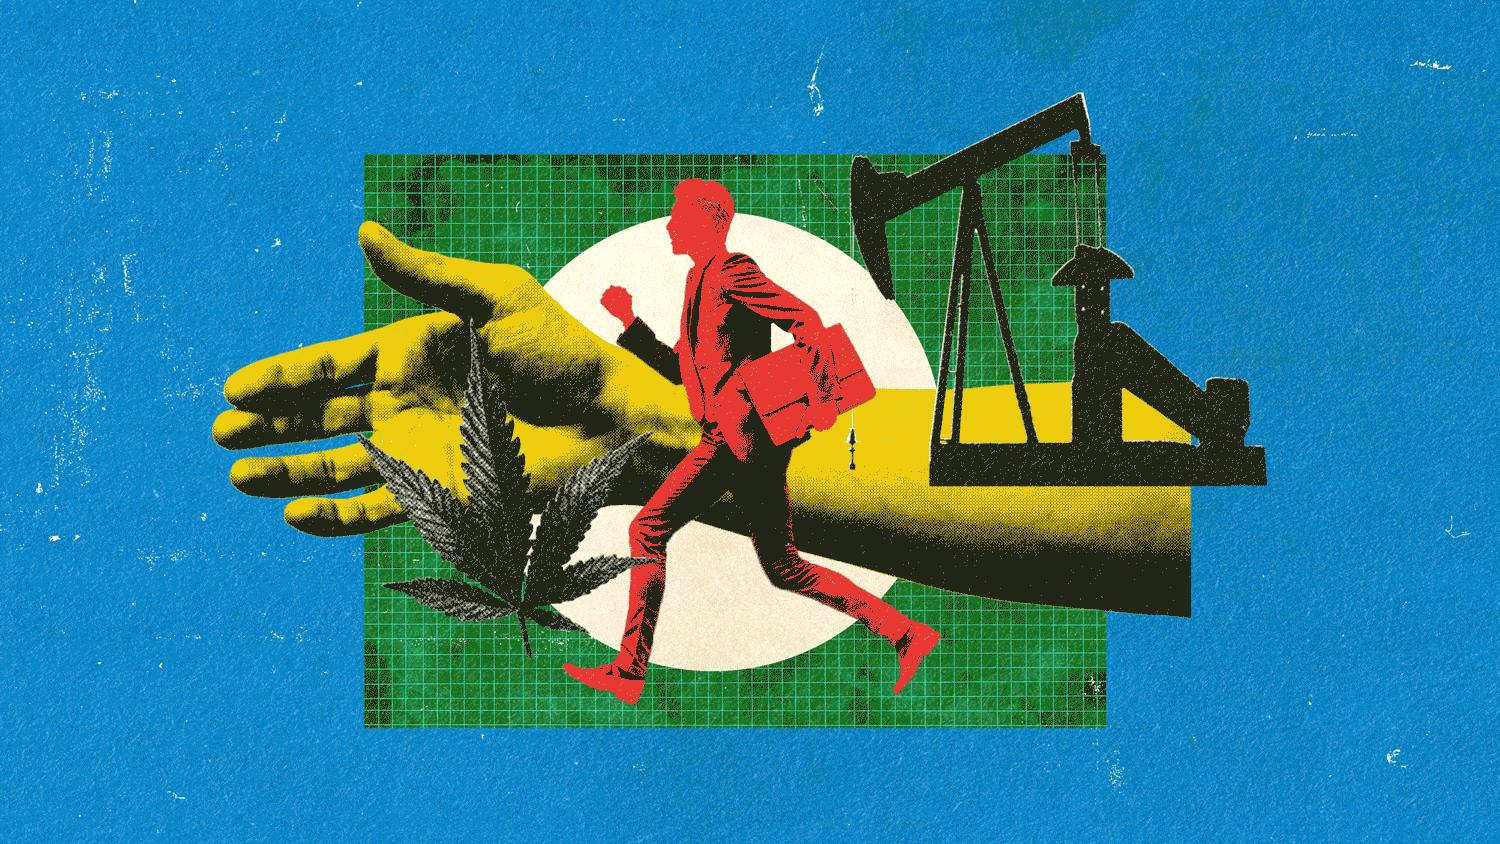 A photo illustration showing the silhouette of a businessman running across an outstretched hand with marijuana and an oil rig